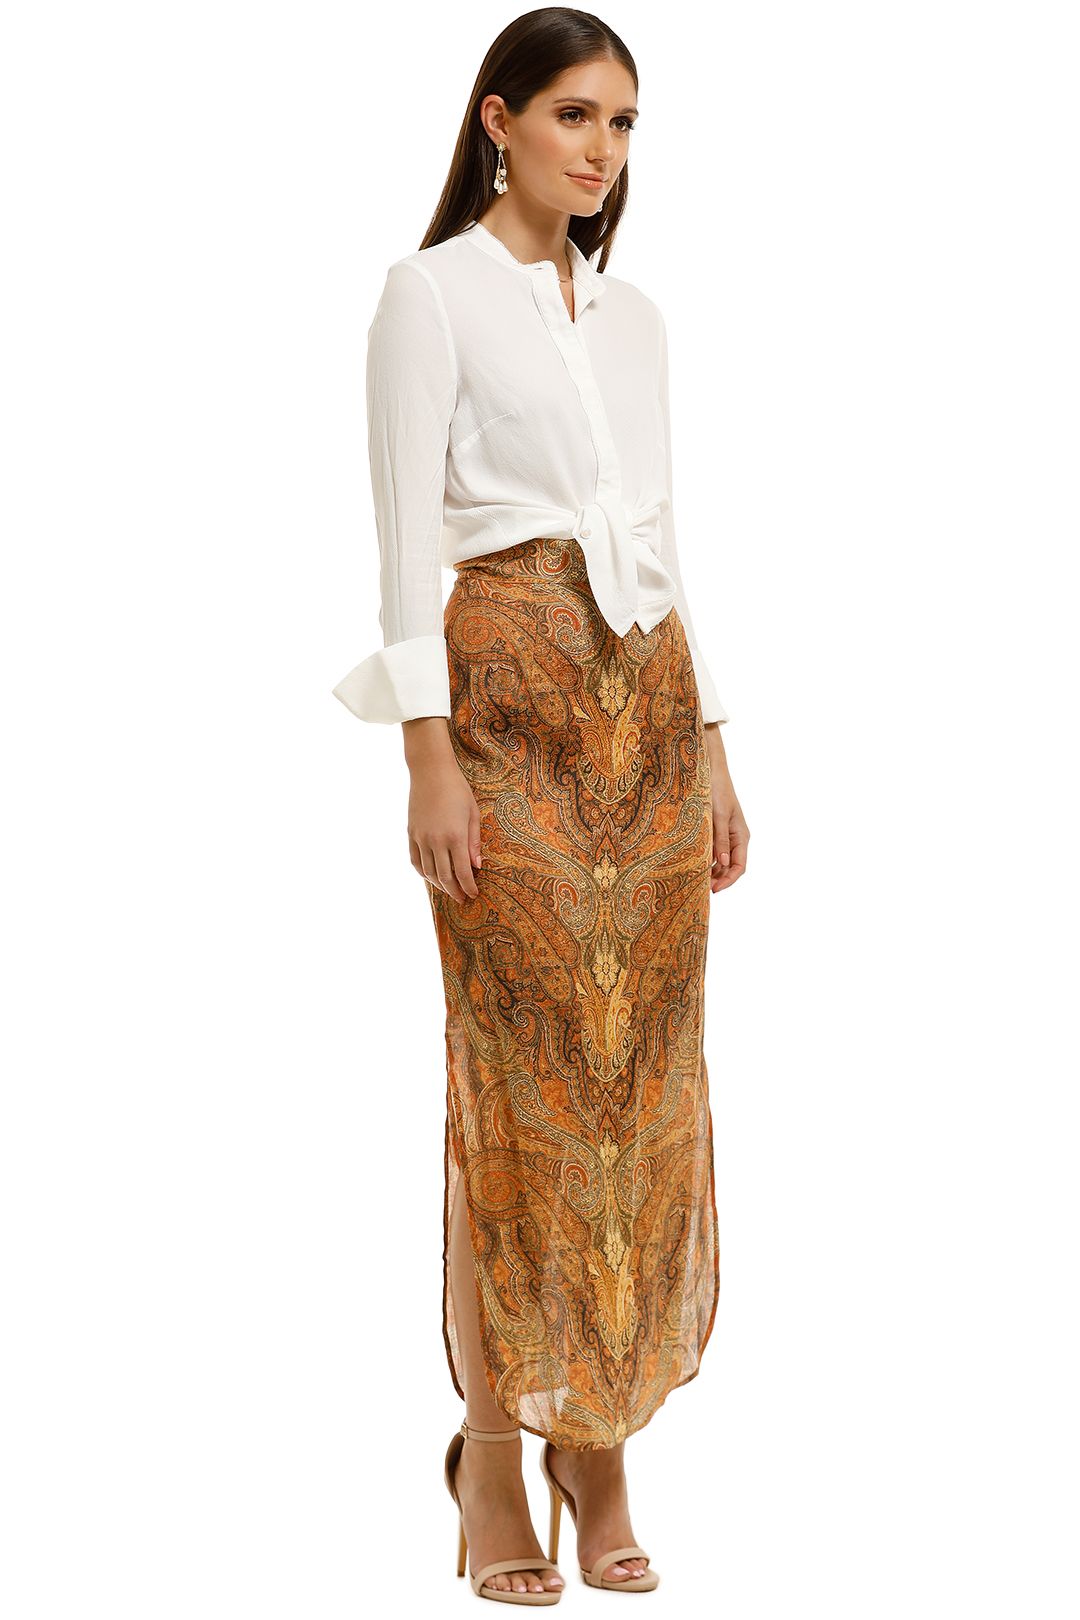 Ministry of Style - Rhapsody Skirt - Brown - Side